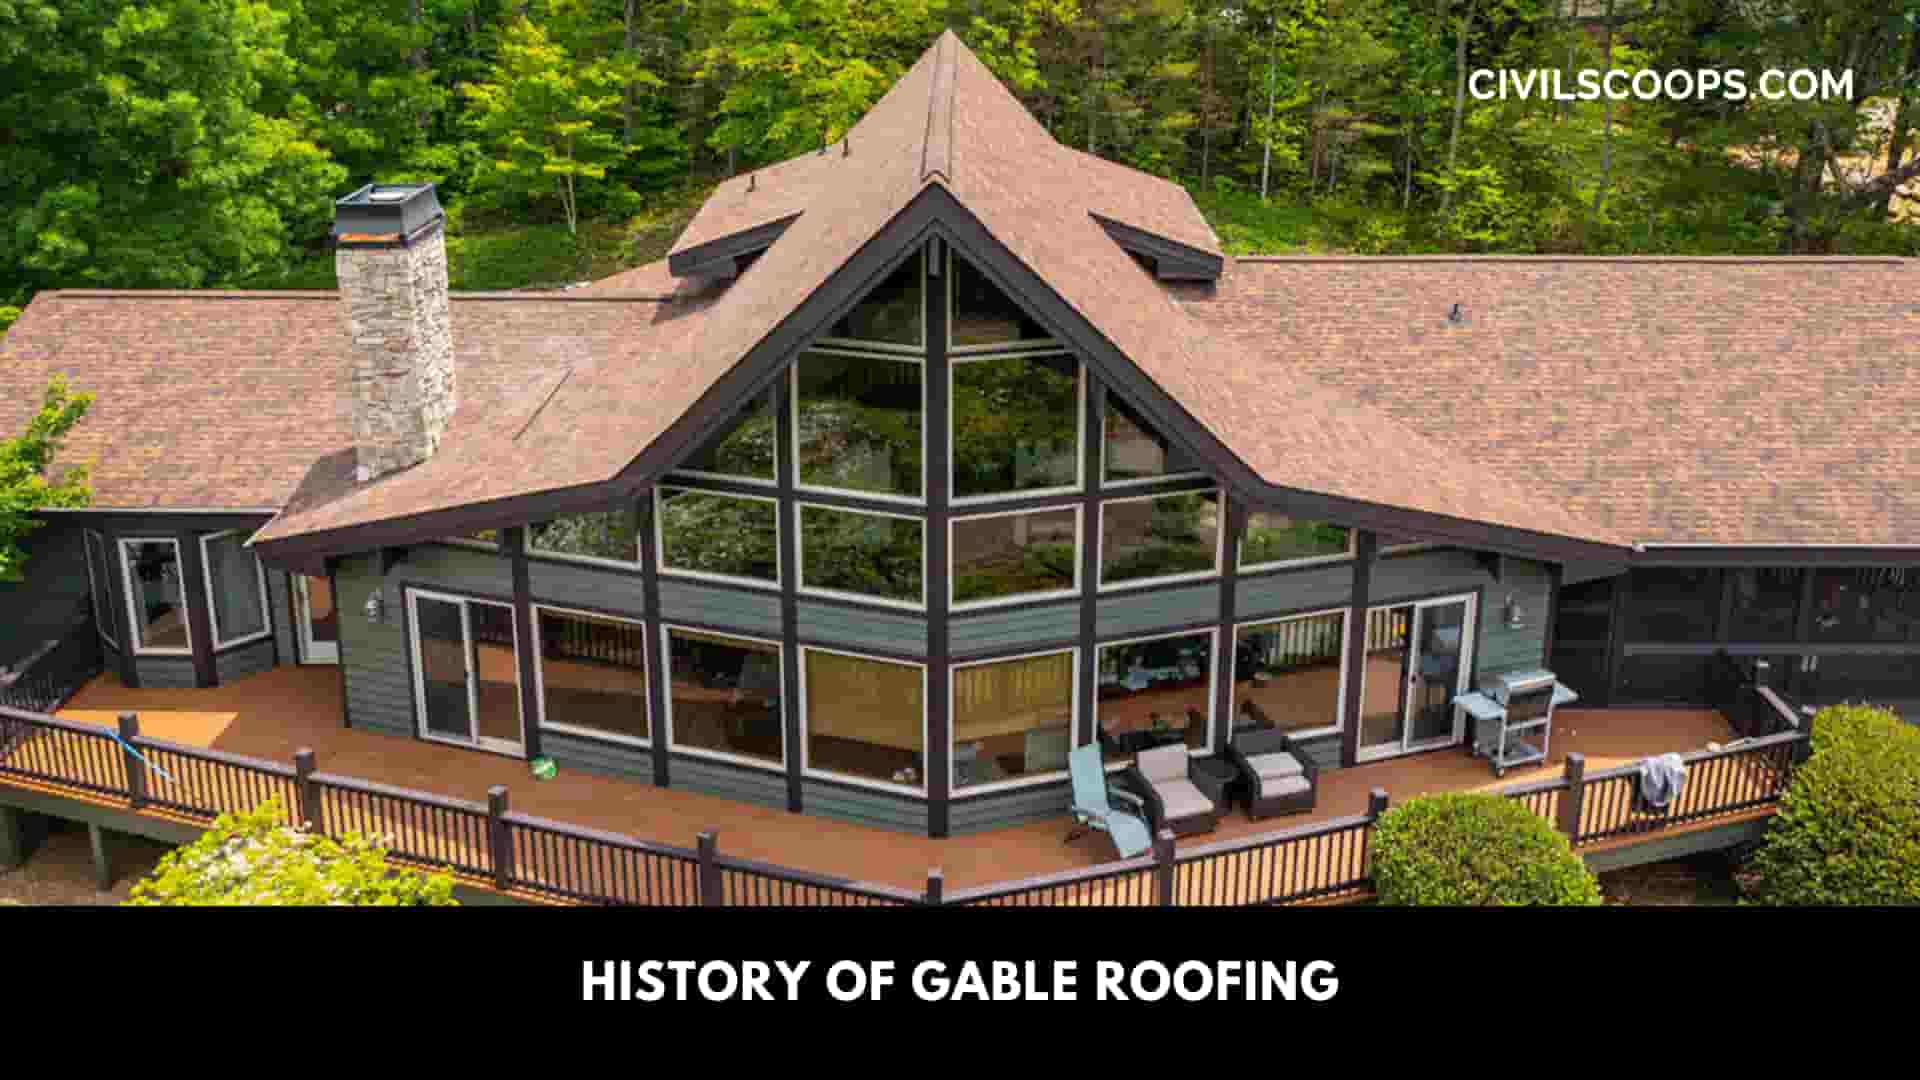 History of Gable Roofing